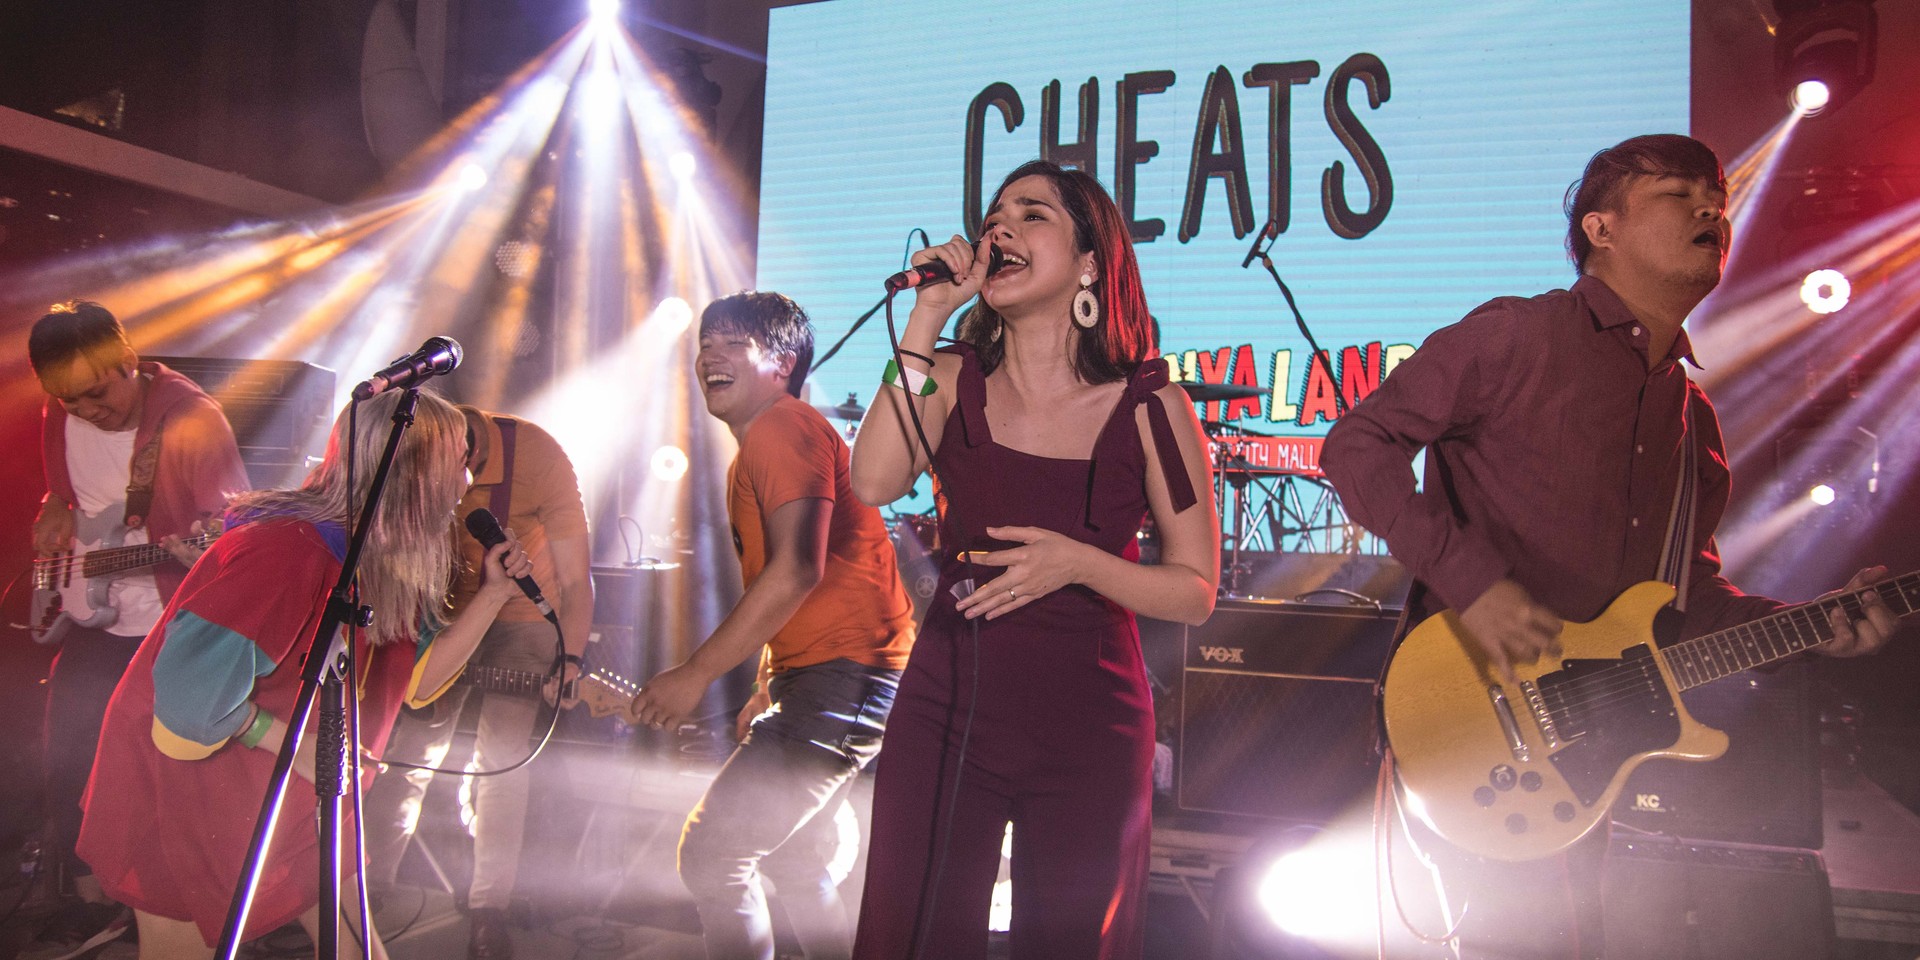 Linya-Linya Land brings the fun in puns with Cheats, Sandwich, Autotelic, and more – photo gallery